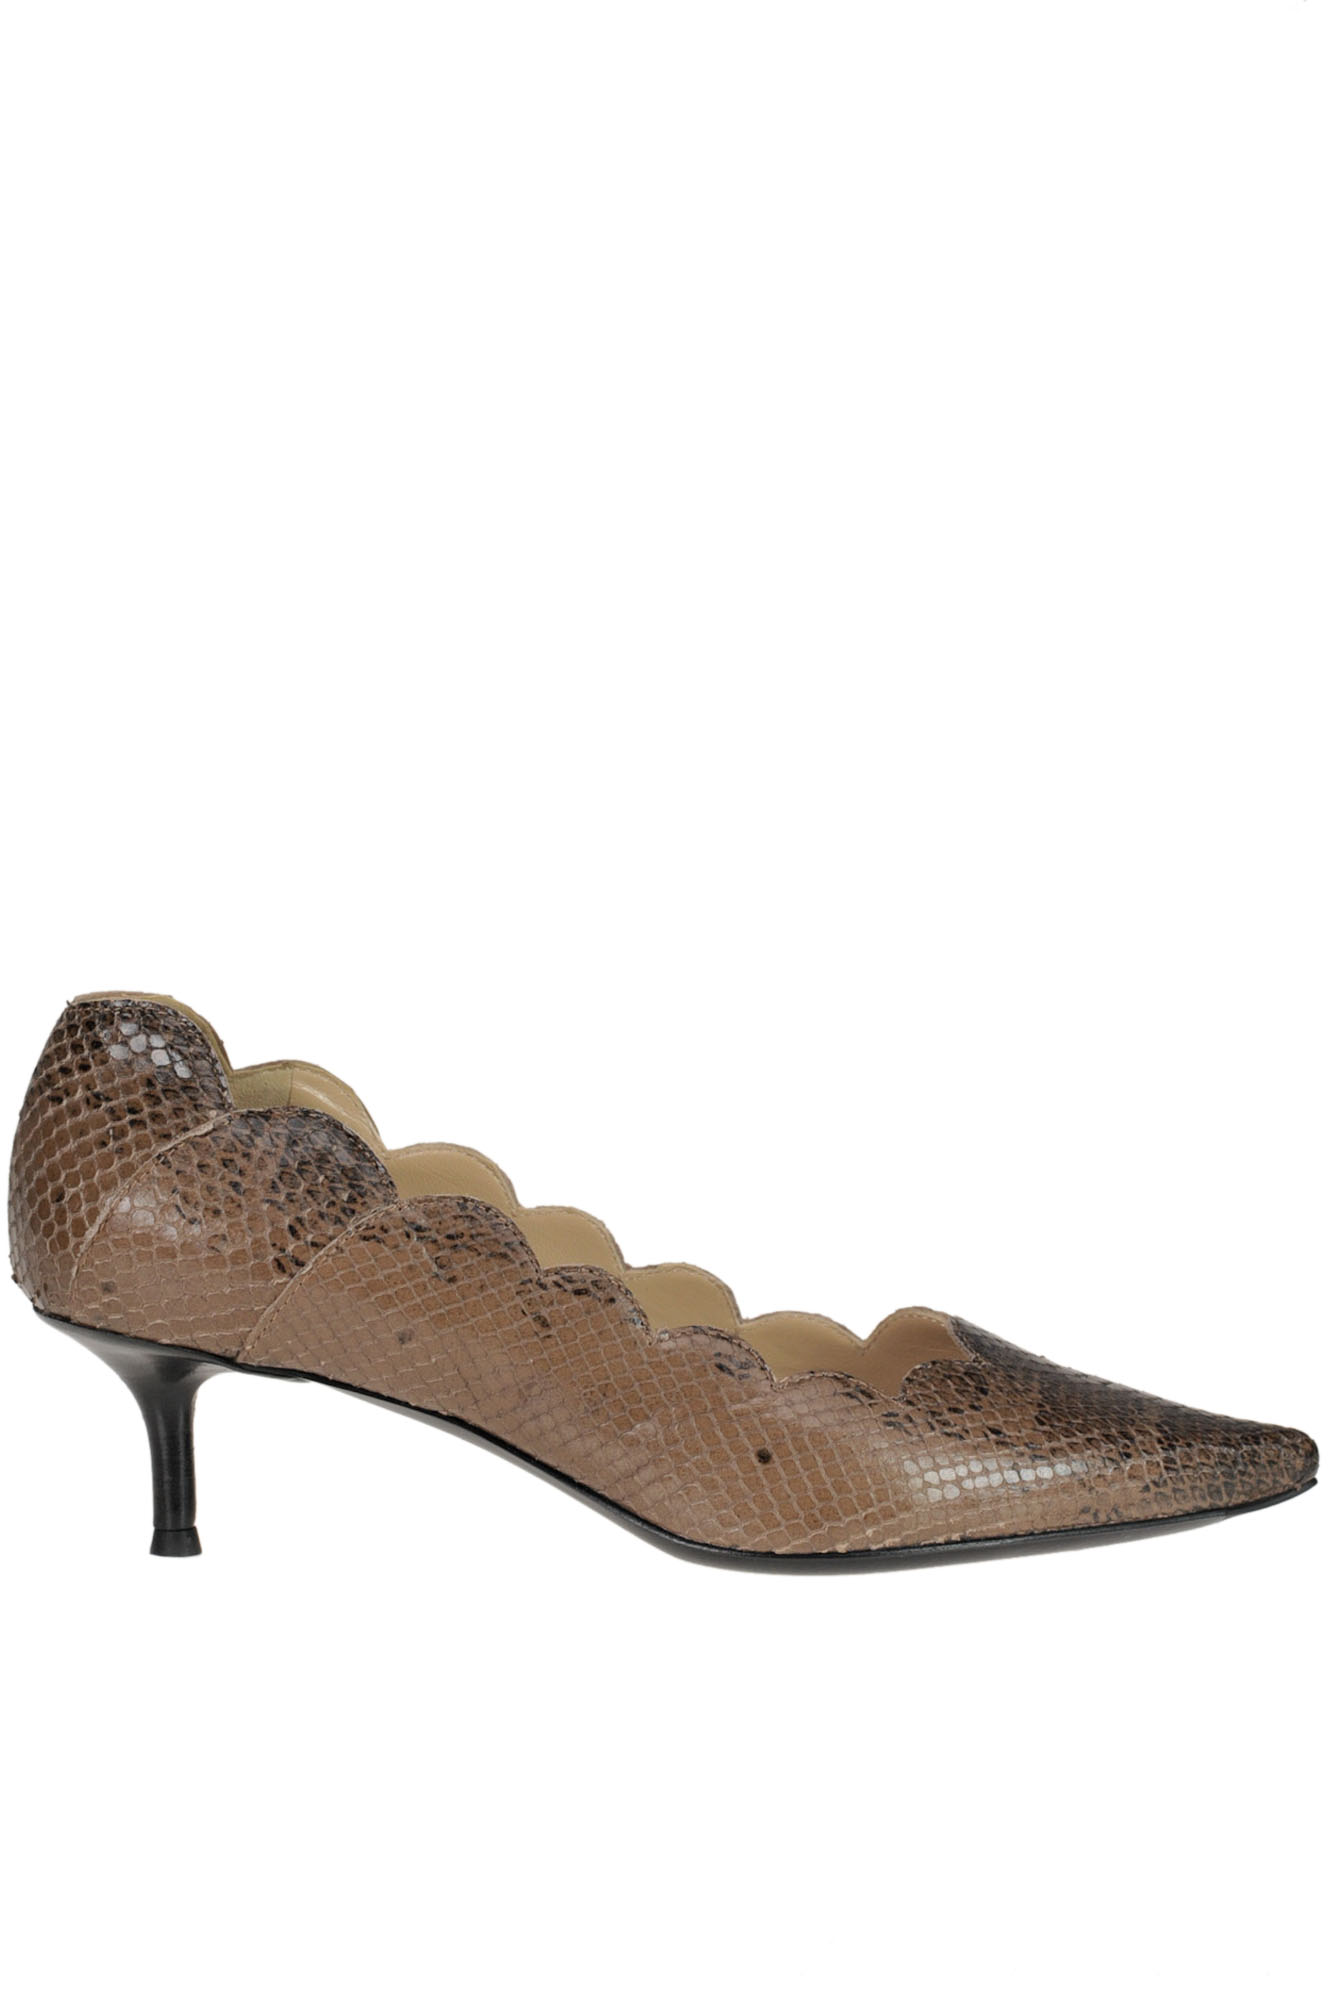 Chloé Reptile Print Leather Pumps In Light Brown